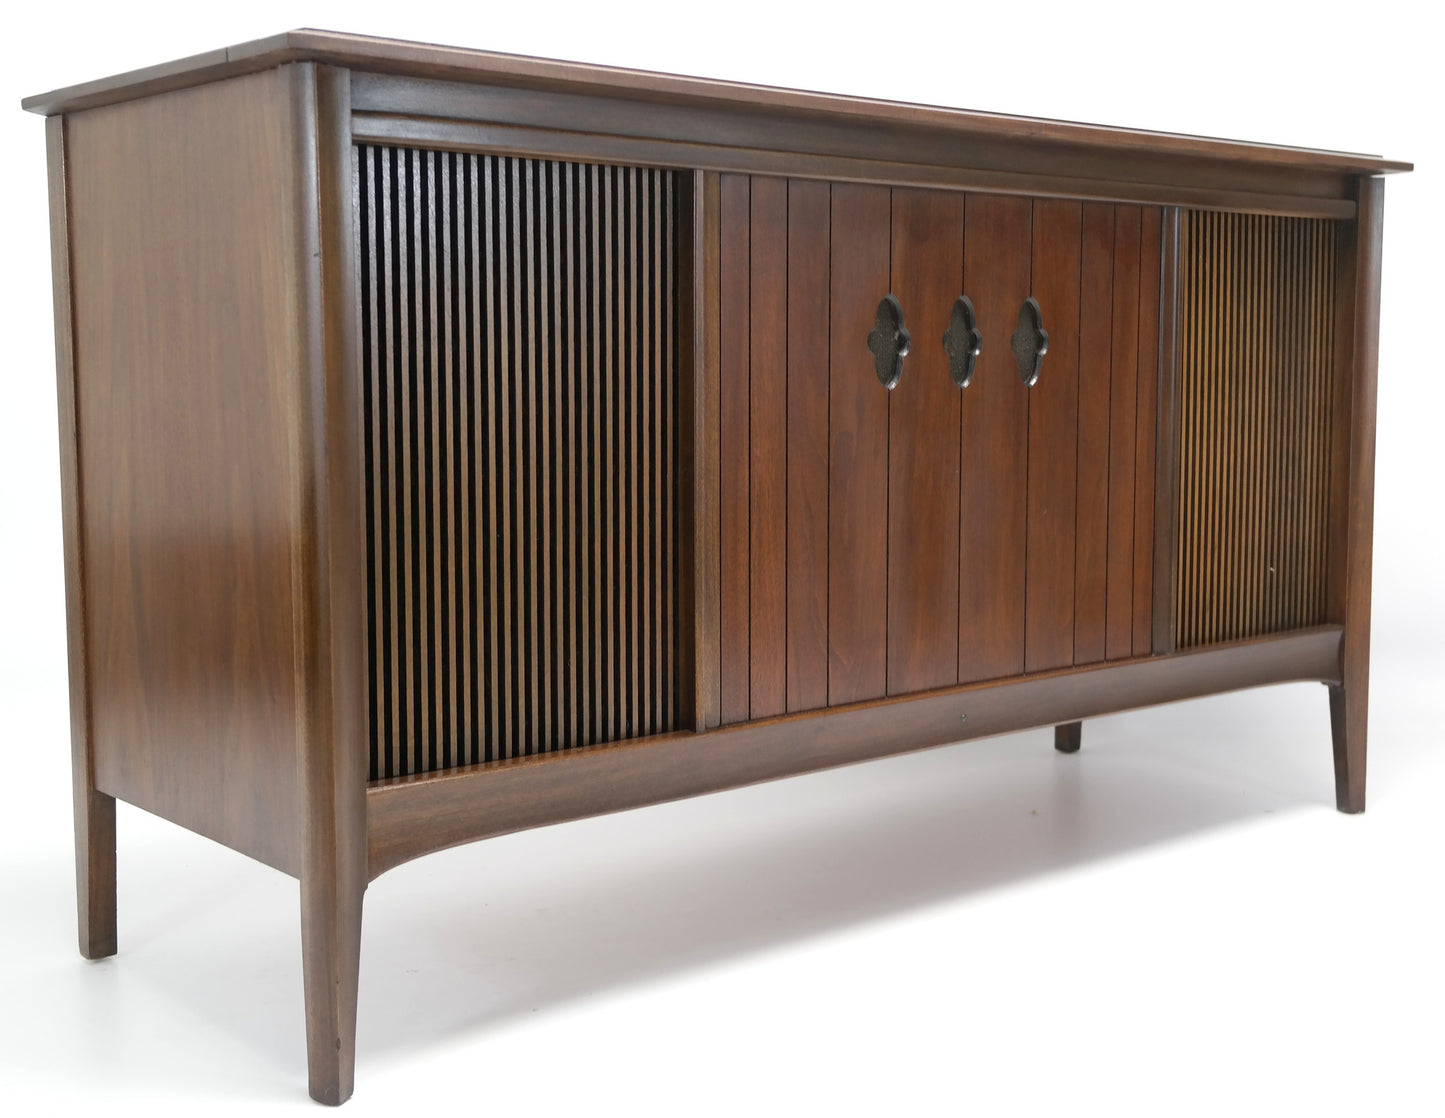 Mid Century Sylvania Stereo Console Record Player - Bluetooth iPod iPhone Android Input AM/FM Tuner The Vintedge Co.